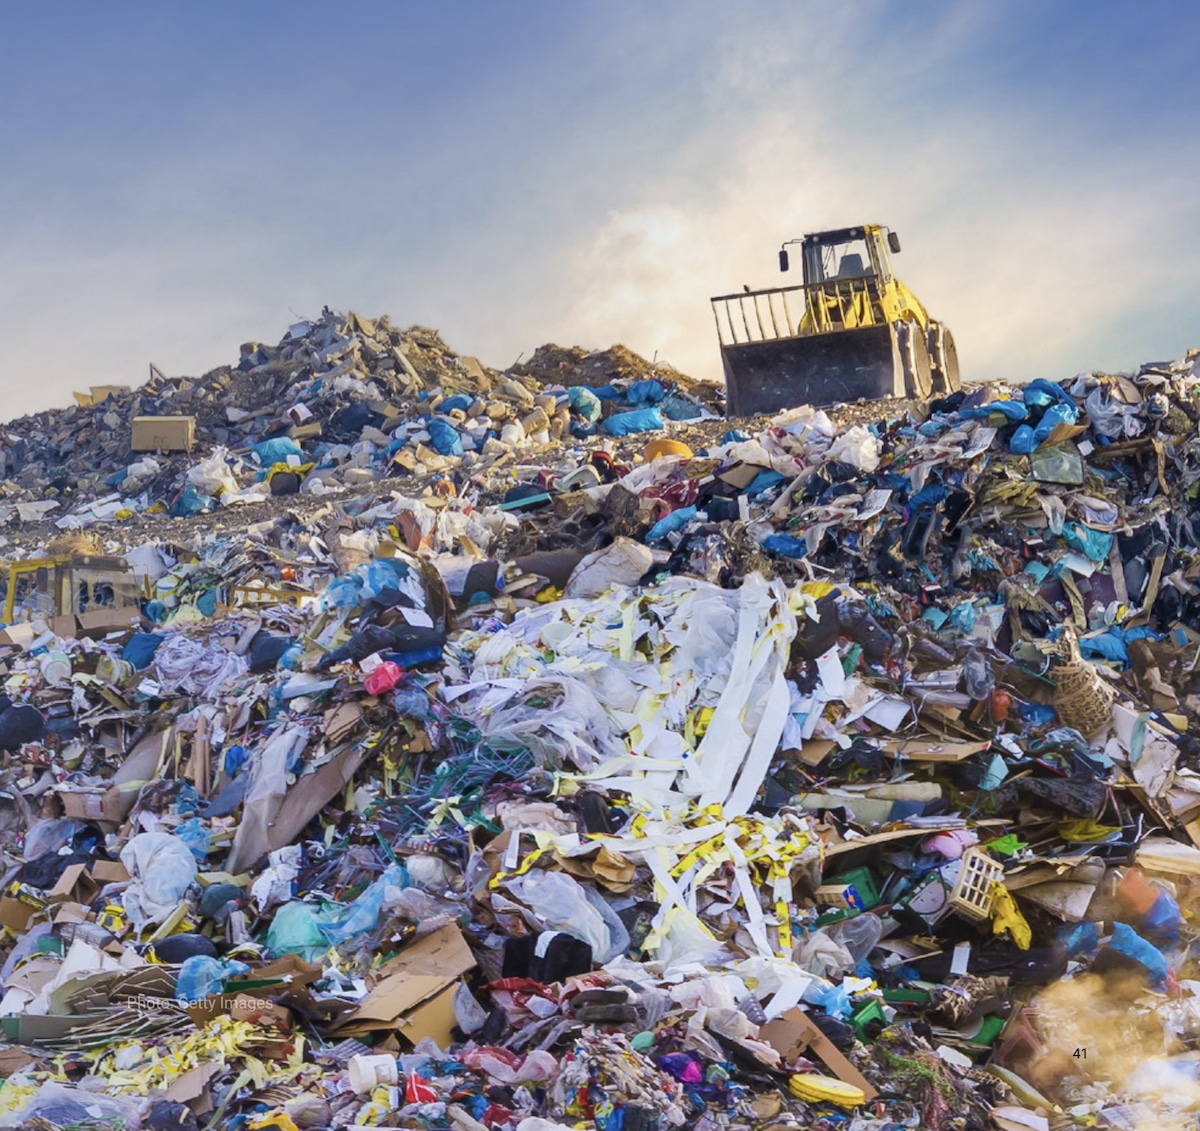 A new United Nations Environment Programme report focuses on reducing plastic pollution, illustrated here by a dump truck in a large landfill mound of plastic waste.